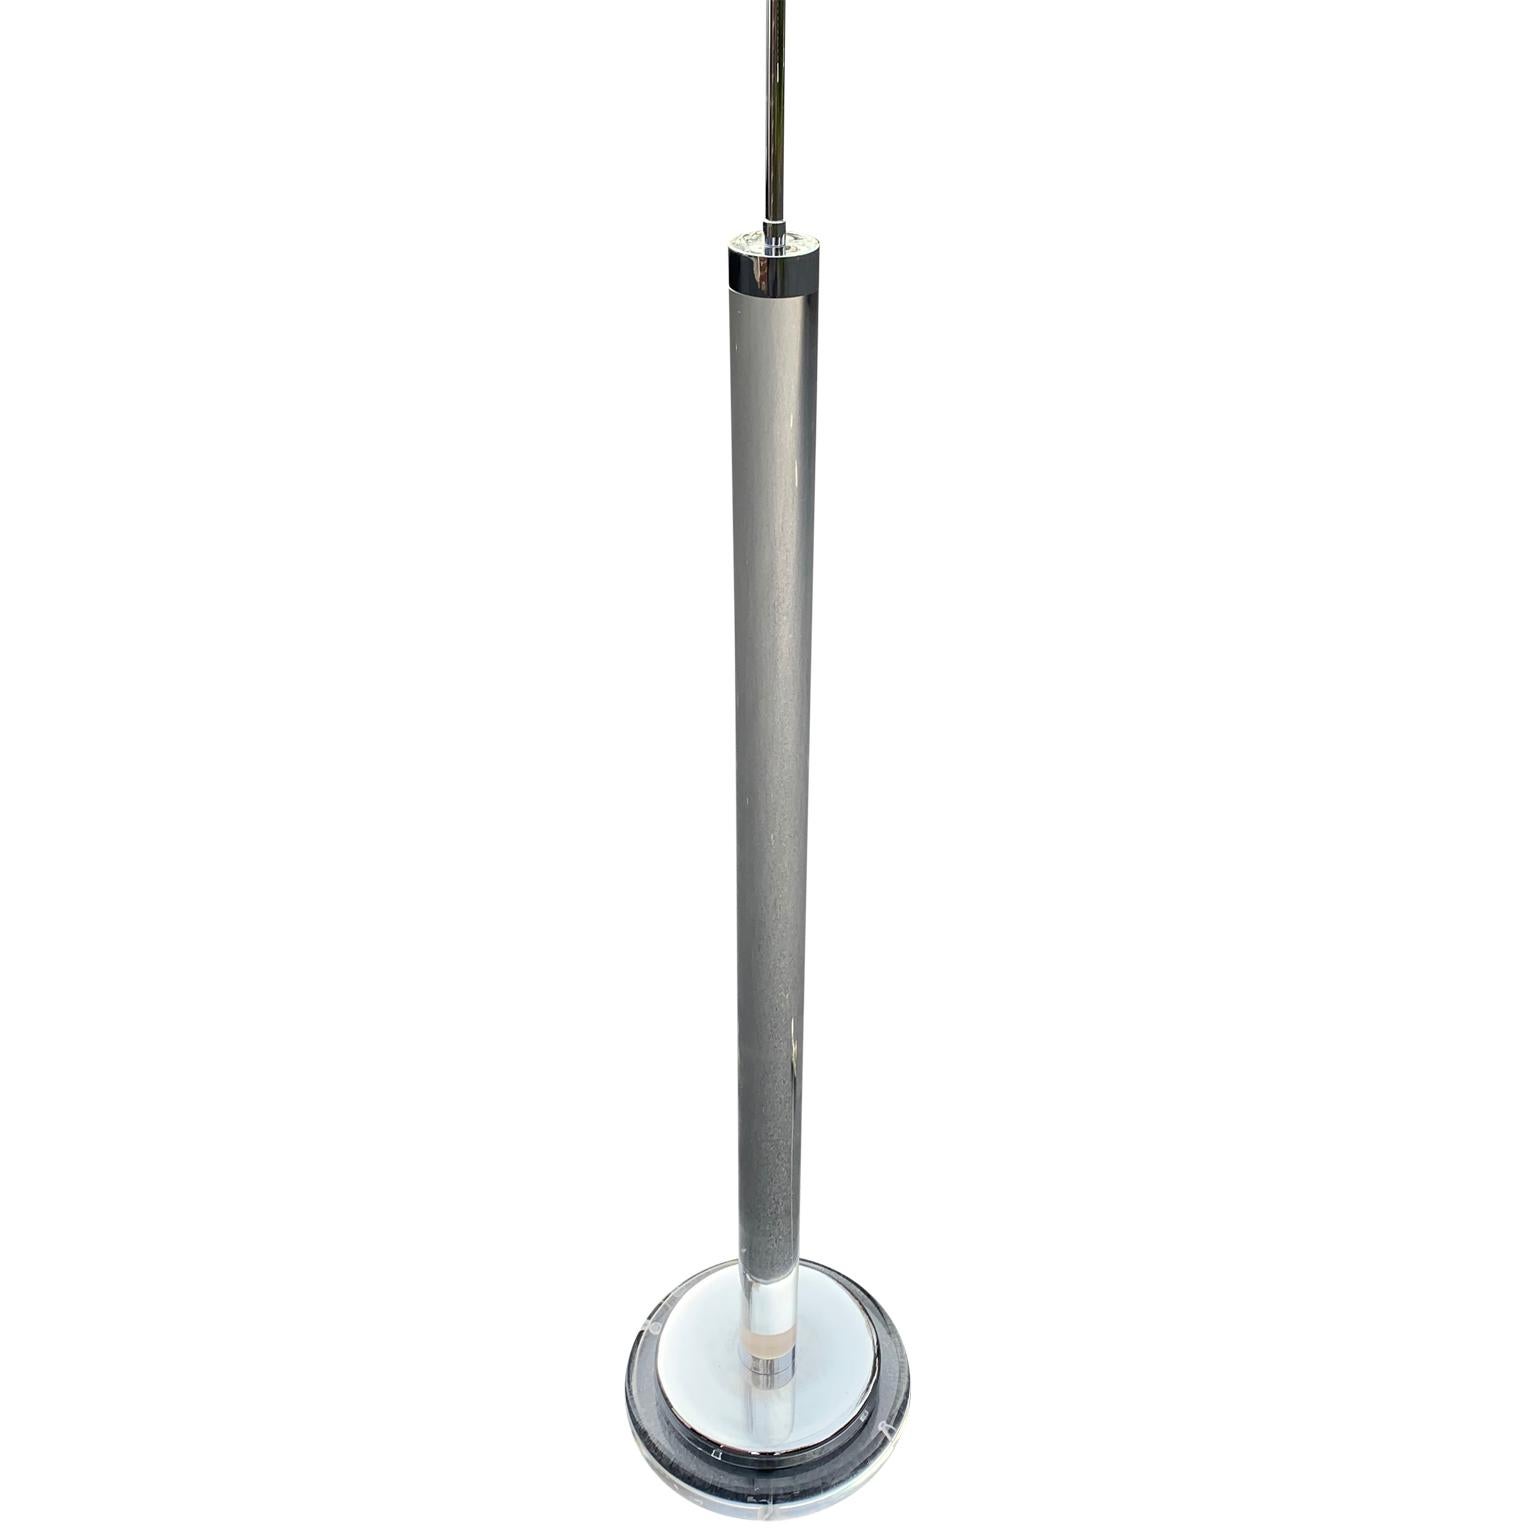 American Mid-Century Modern Chrome And Lucite Column Floor Lamp For Sale